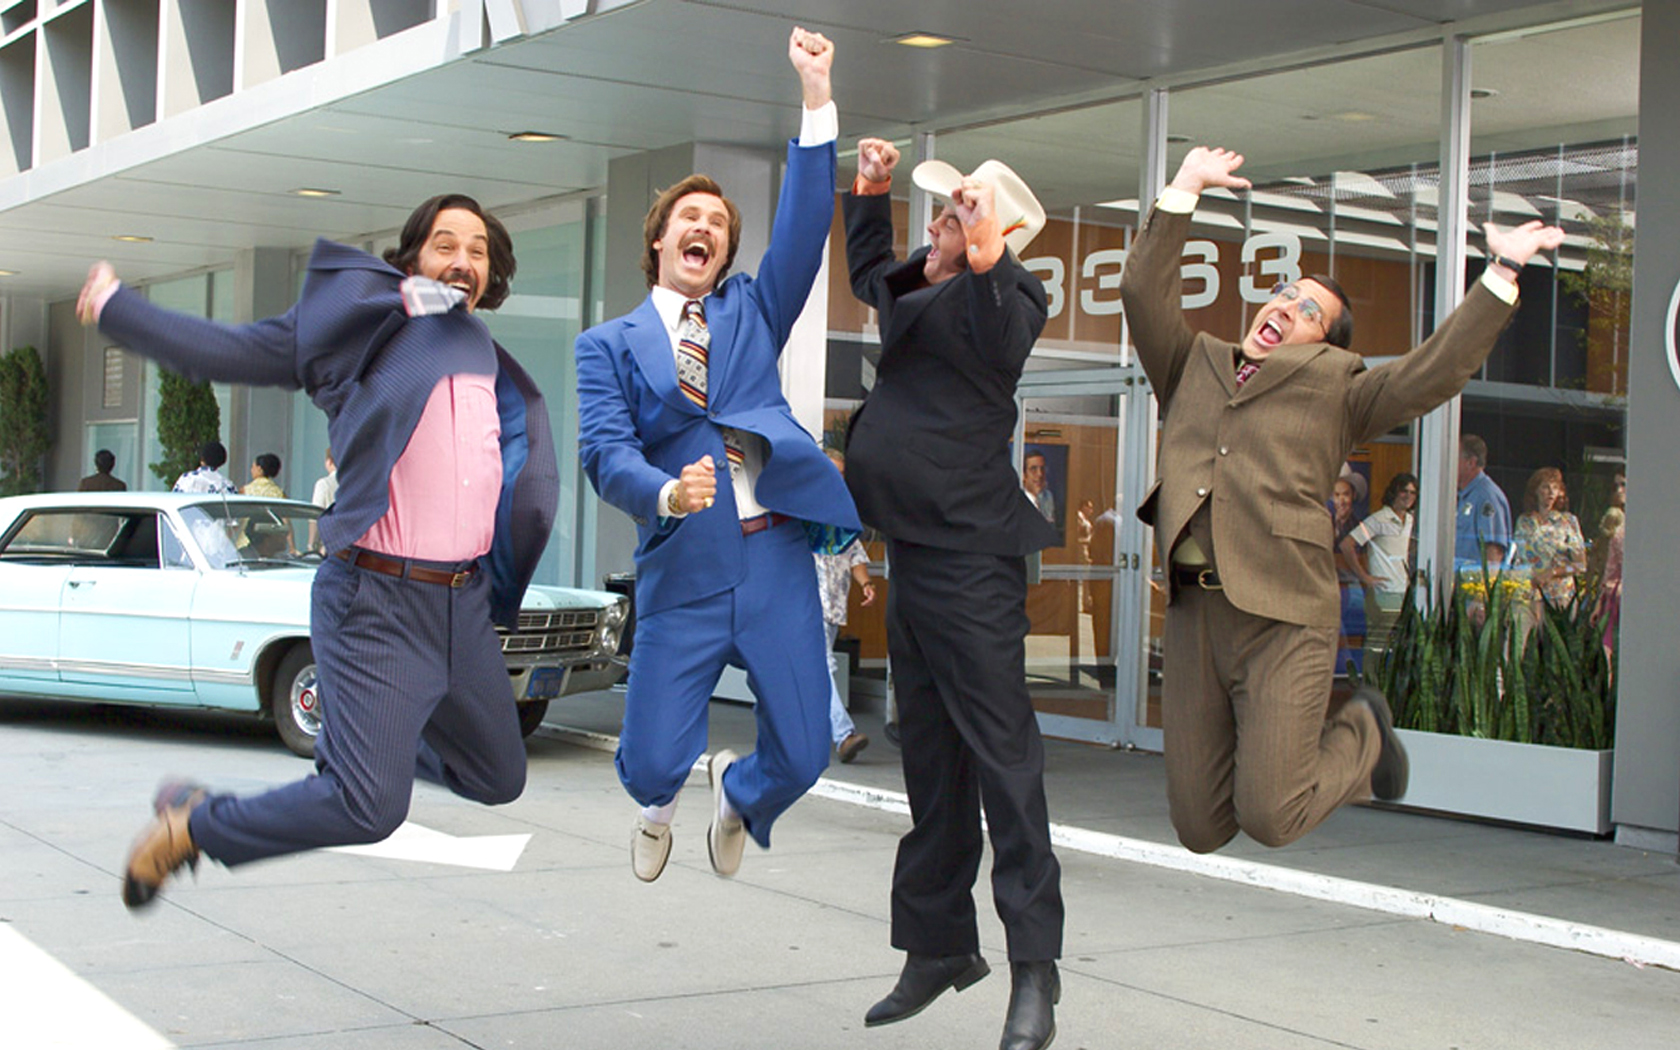 Movie Anchorman: The Legend of Ron Burgundy HD Wallpaper | Background Image